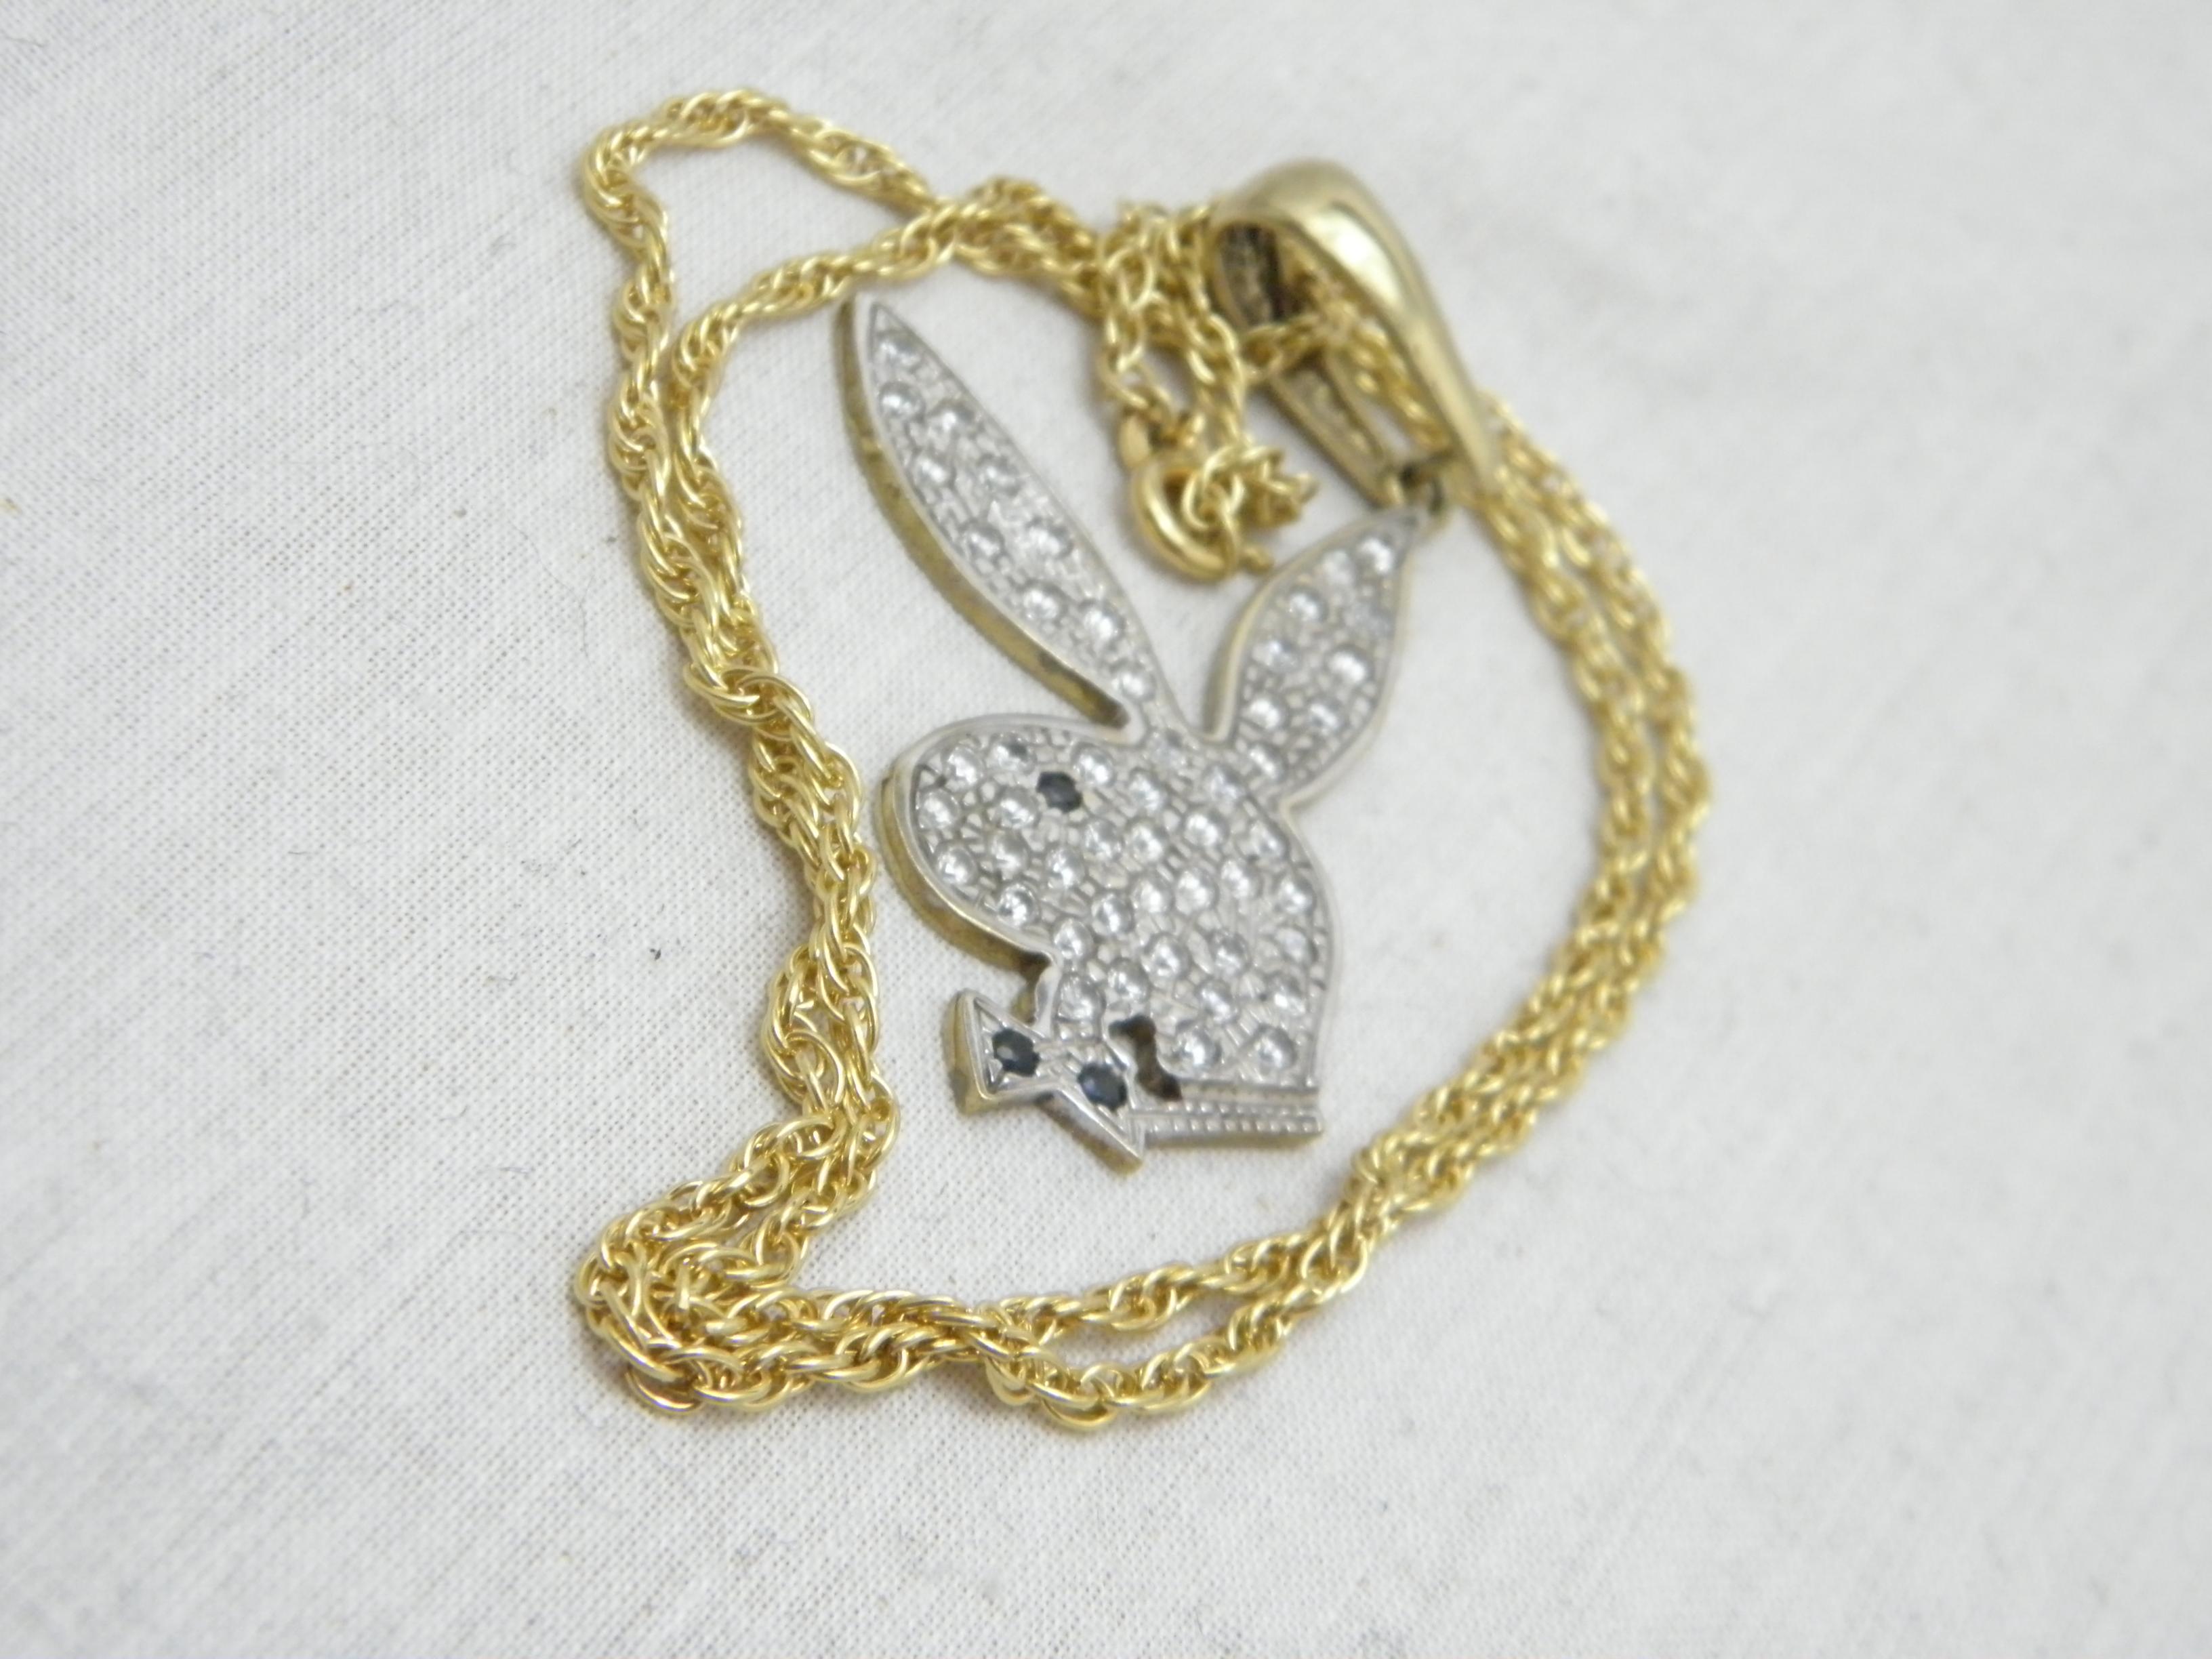 Vintage 9ct Gold Enormous Playboy Bunny Pendant Necklace Rope Chain 375 20 Inch For Sale 2